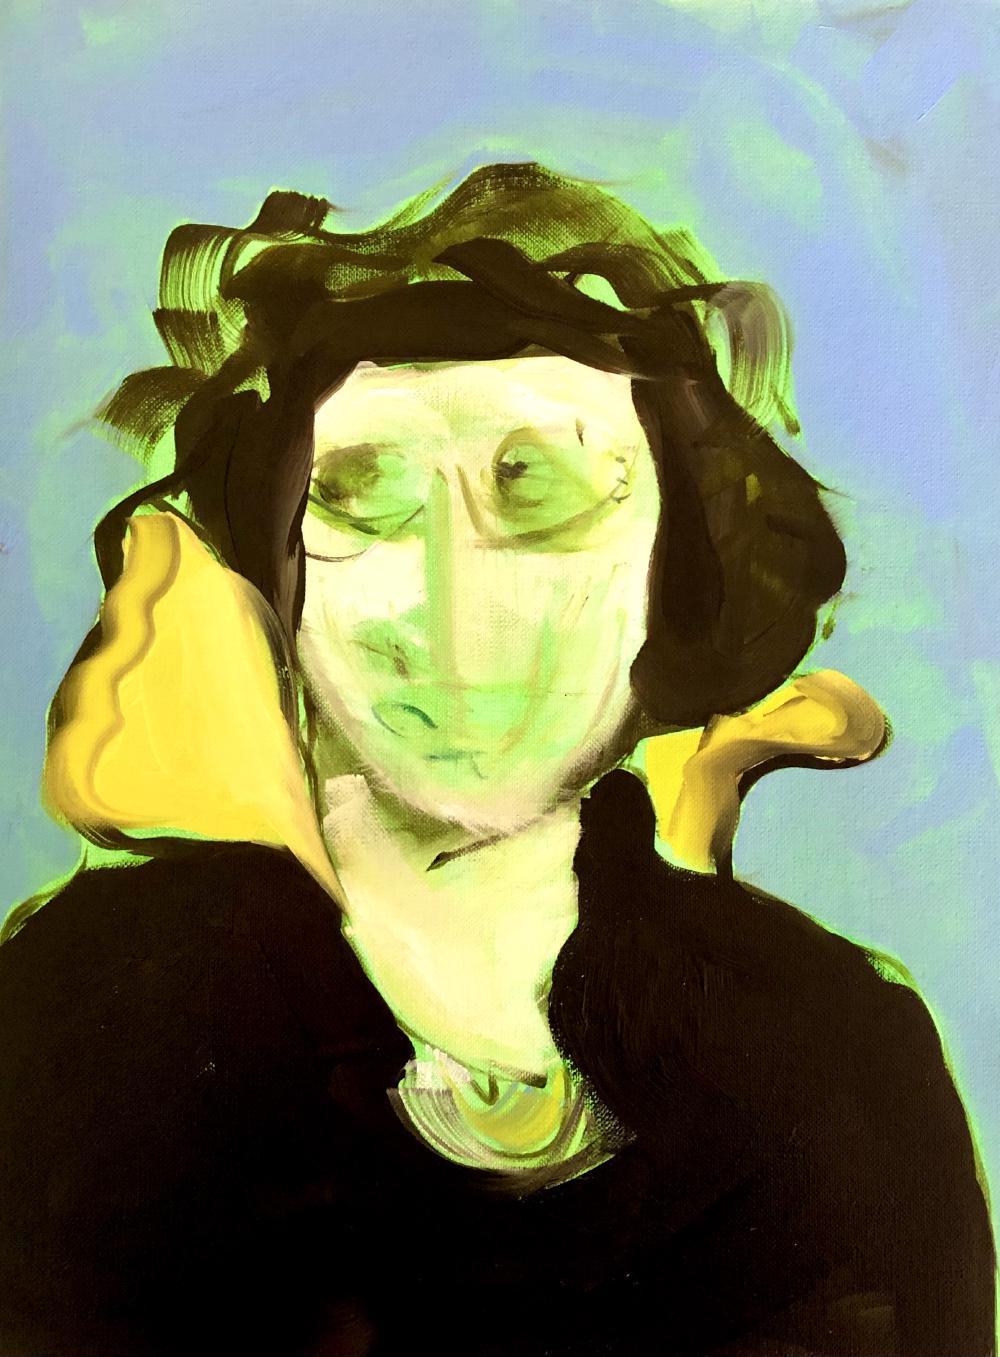 a painting of a woman with a blurred out face, with neon green underpainting, and black and yellow shapes to make out a shirt that comes up with a big colour, under short bobbed hair